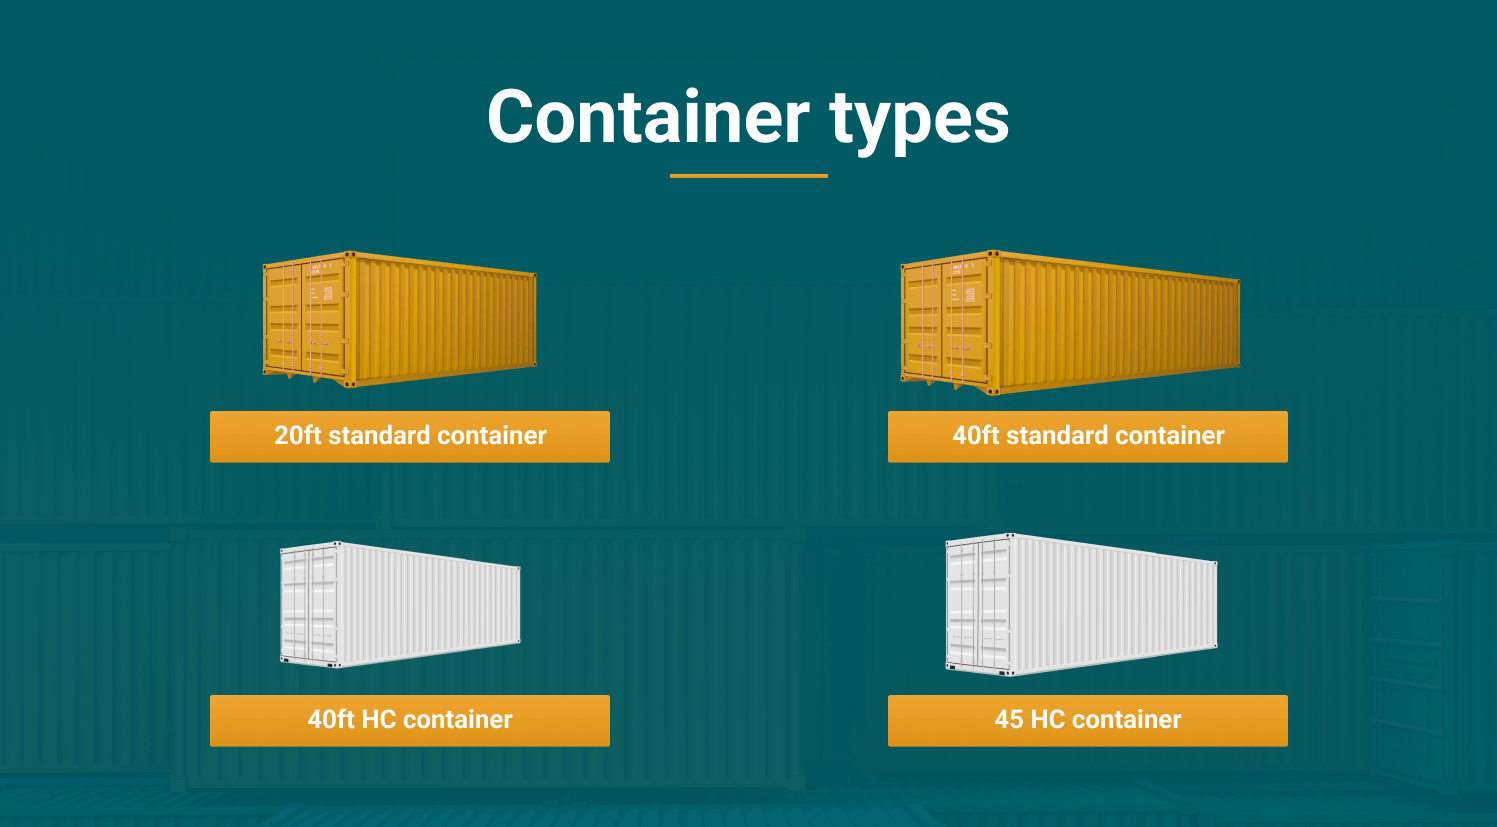 https://www.container-xchange.com/wp-content/uploads/2022/03/Container-types-2-1.png